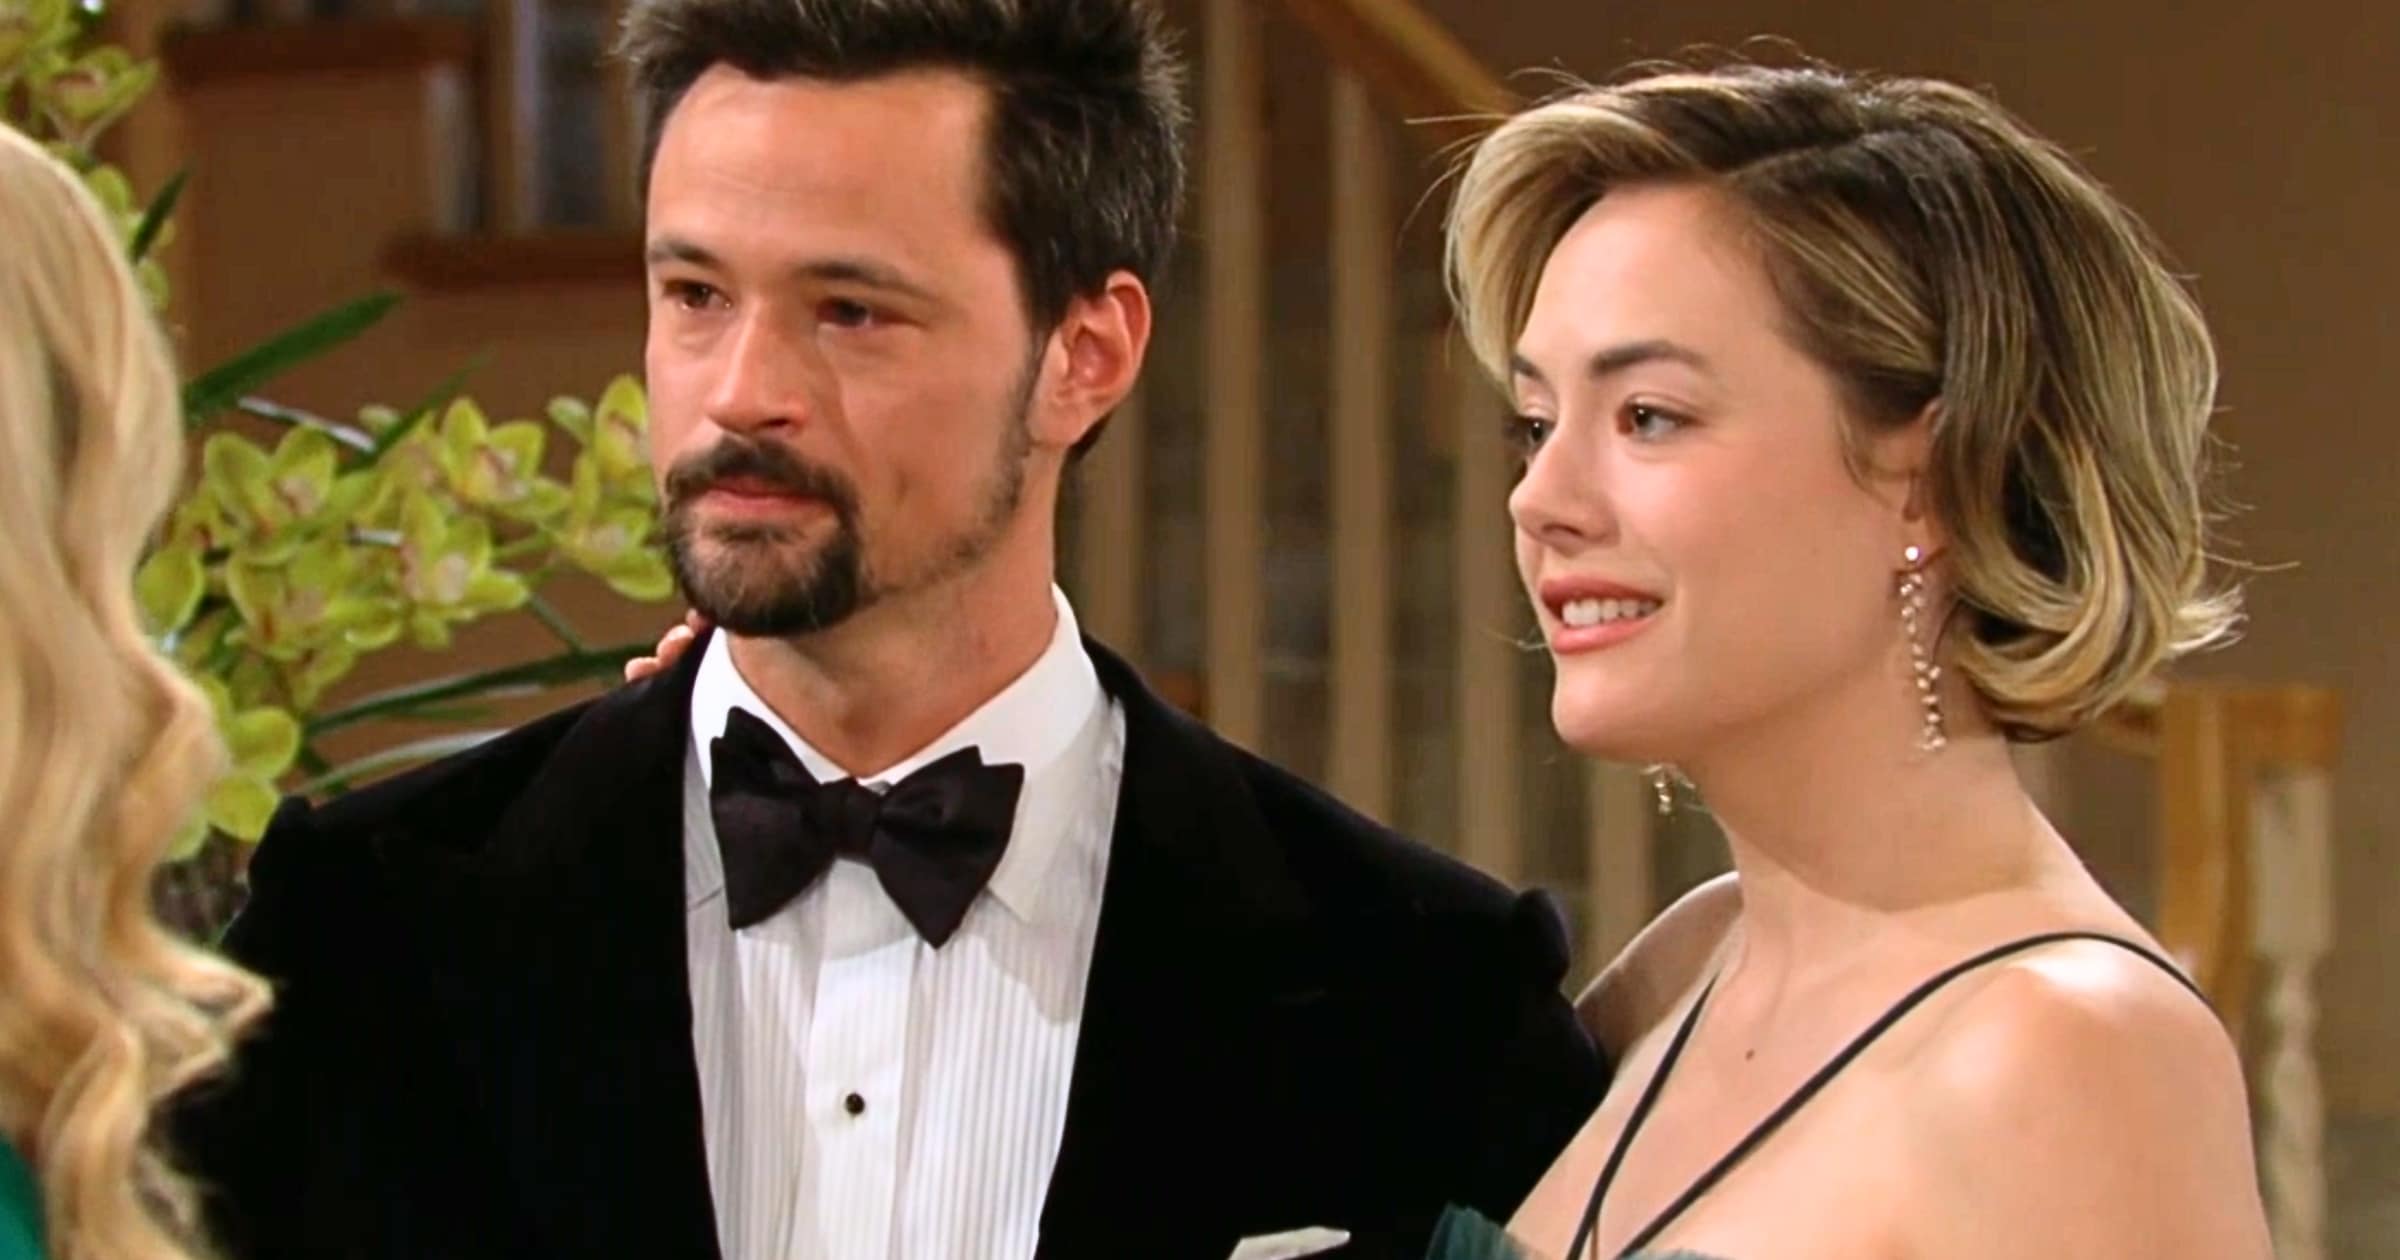 The Bold and the Beautiful - Dec 8 - Thomas and Hope